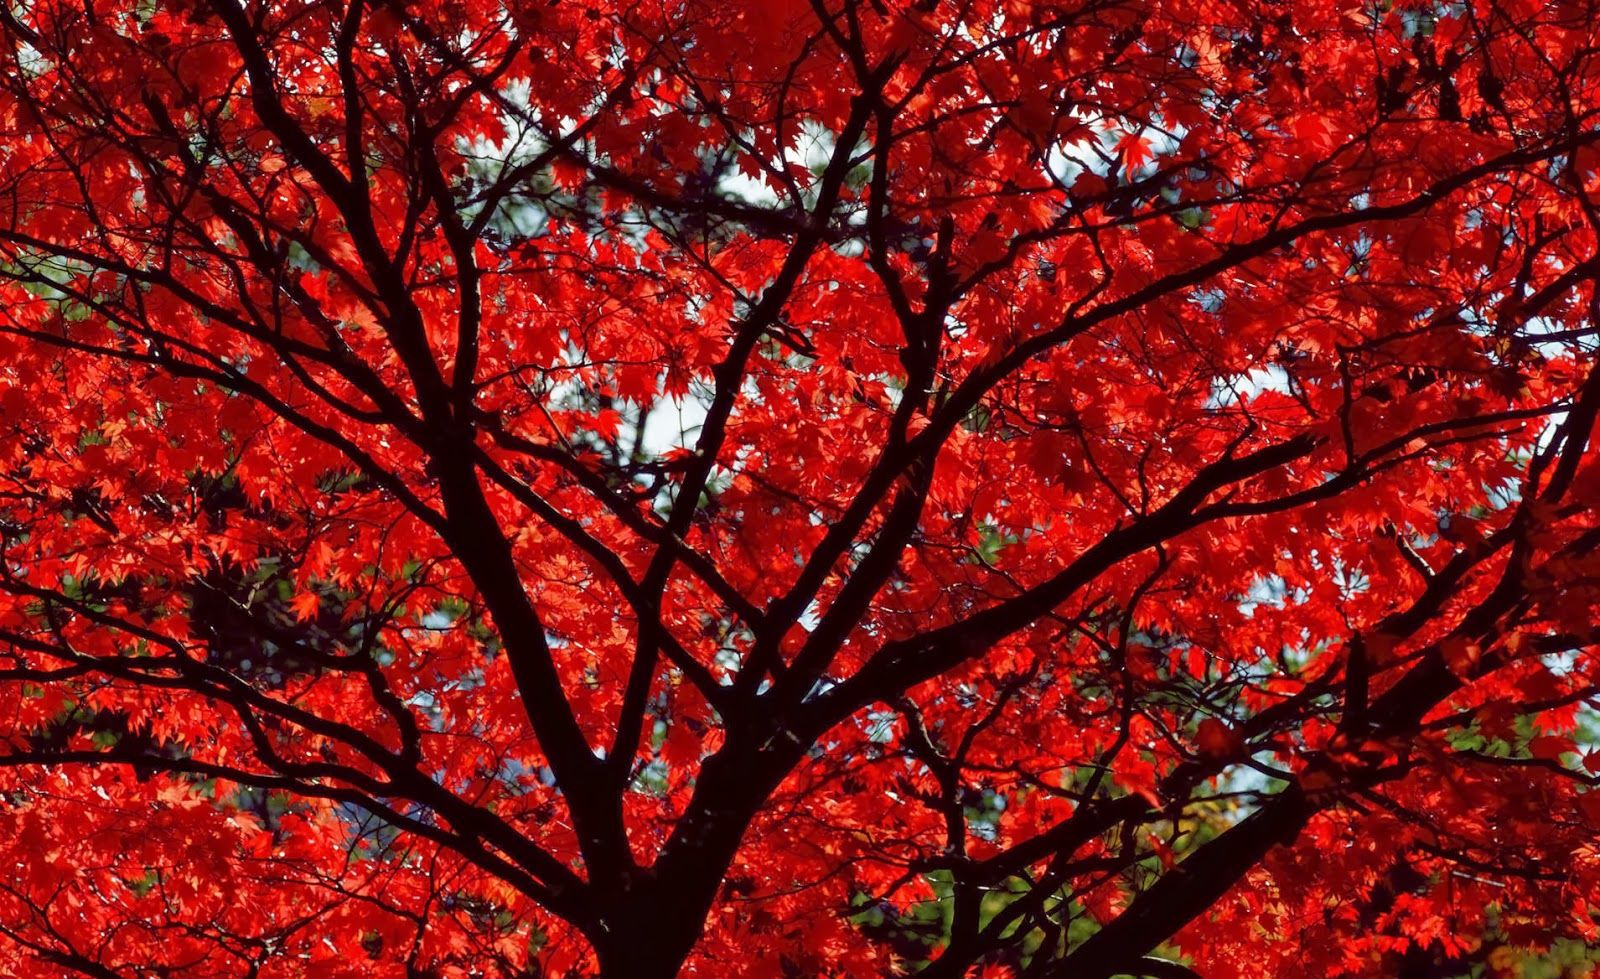 HD Wallpaper Desktop: Autumn Wallpaper With Red Leaves